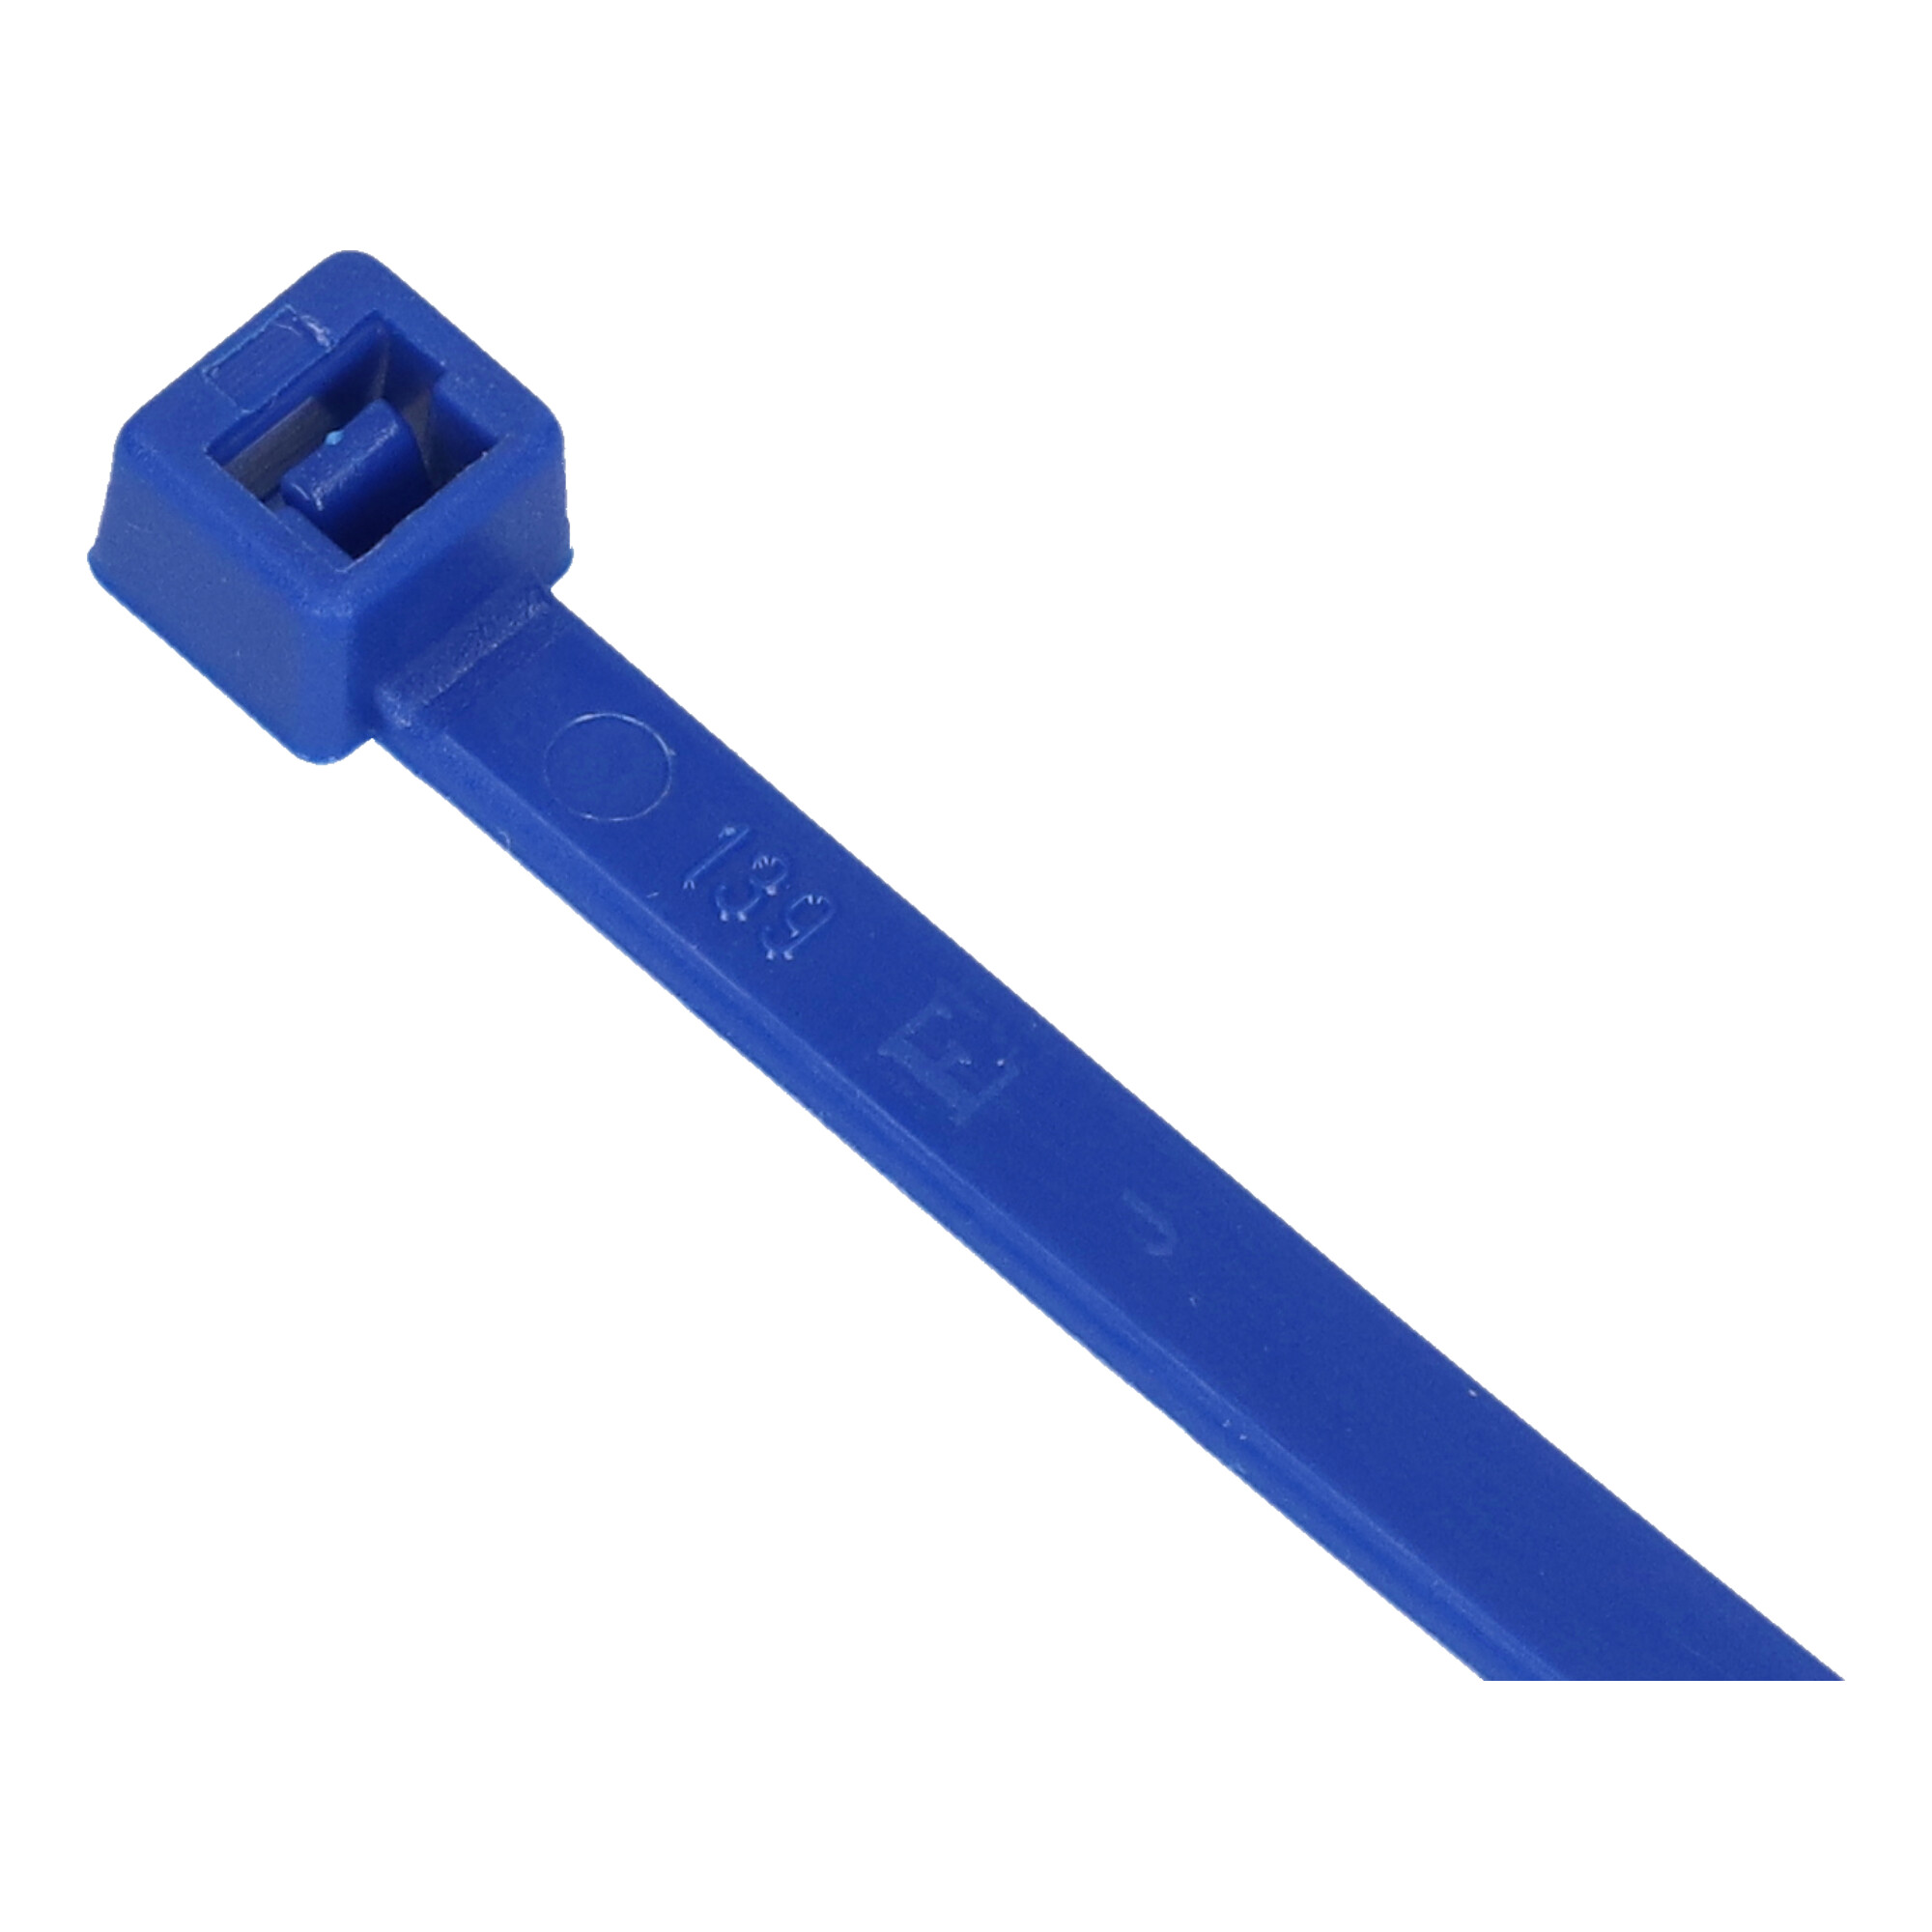 95-0200-035-BE Cable tie PA series